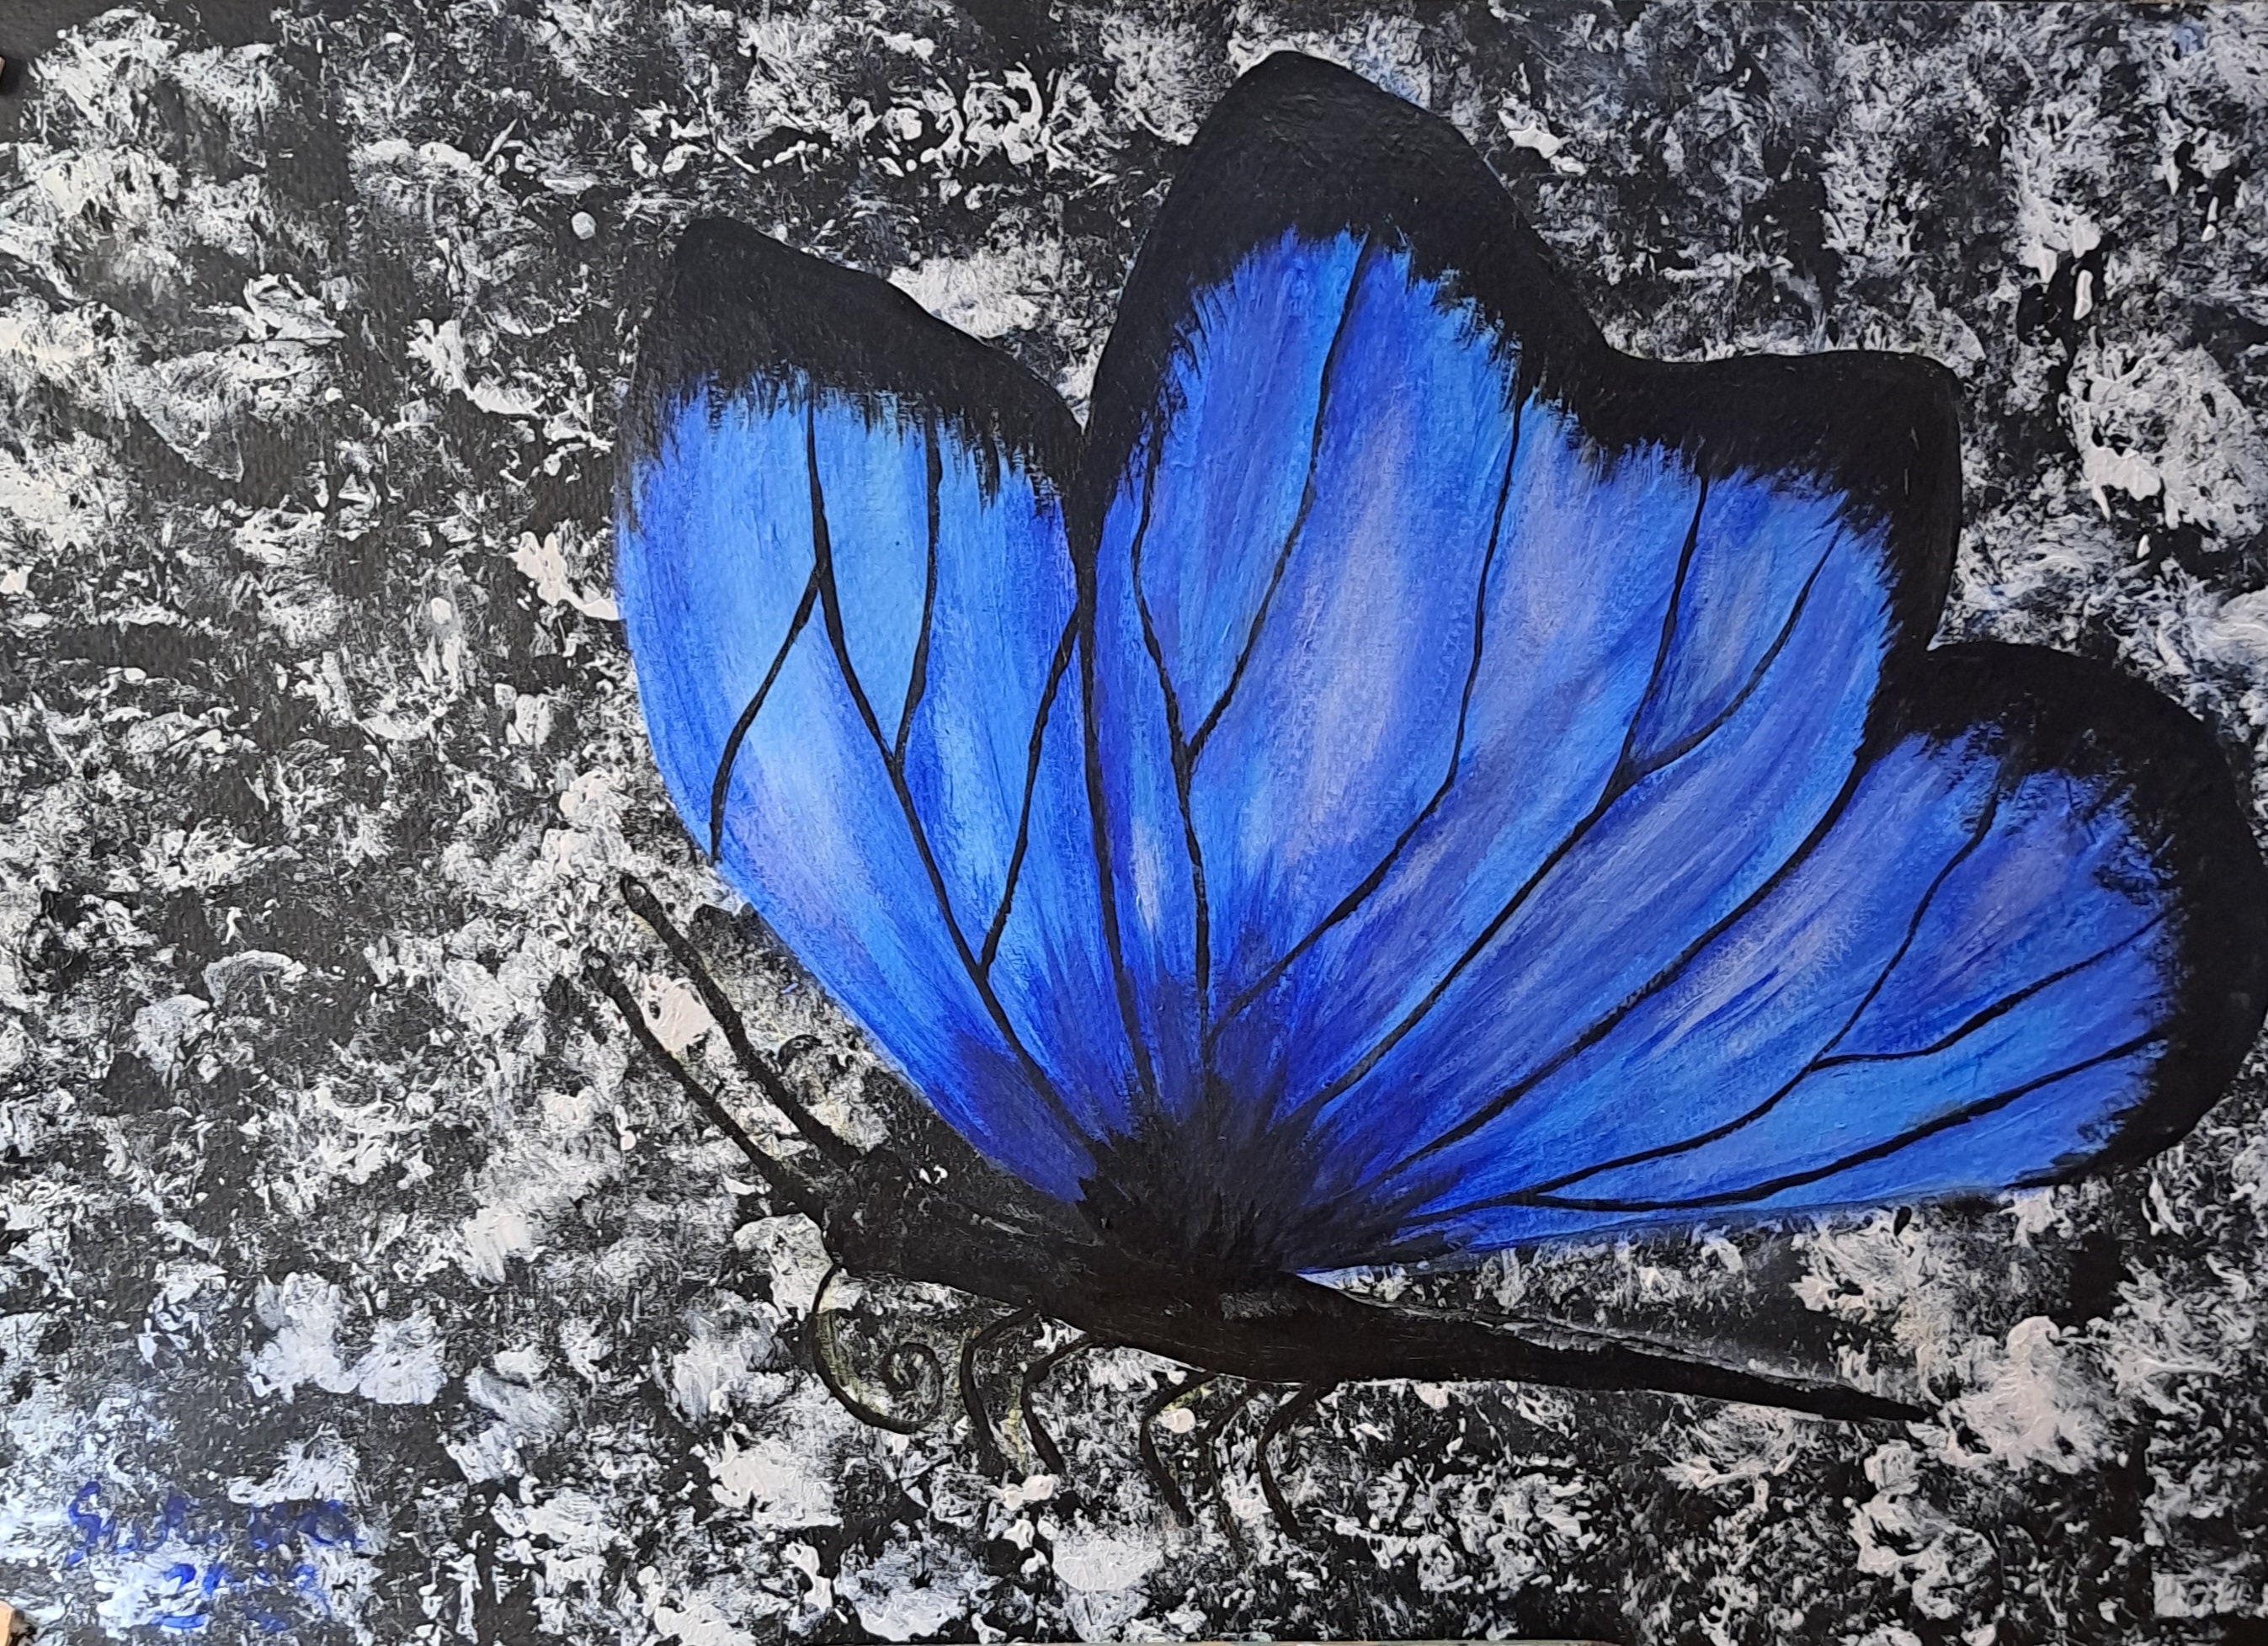 Blue Butterfly Floral Art Original Handmade Acrylic Painting Paper Oil  13*16.7